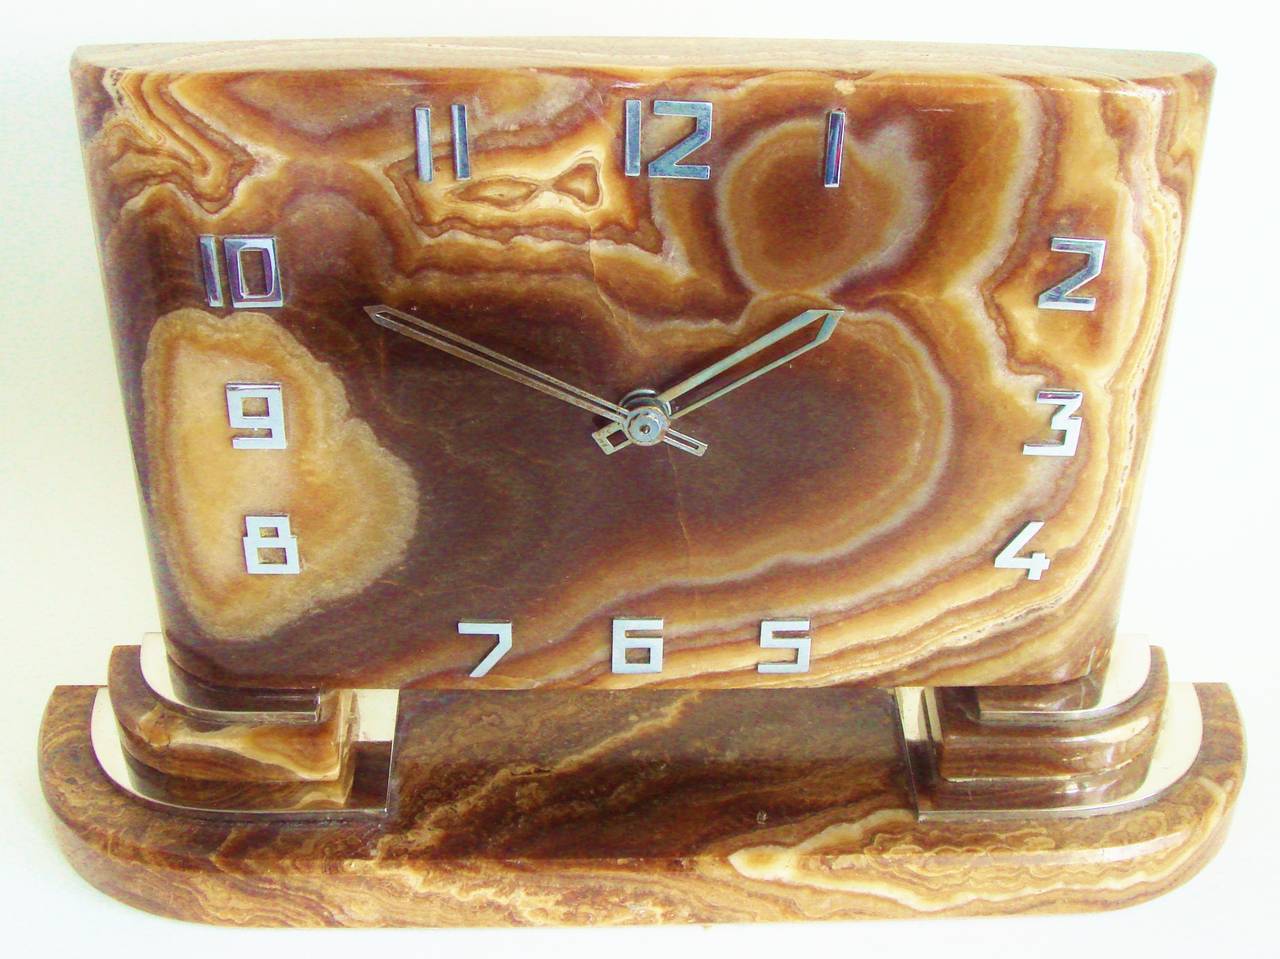 This beautiful Classic Art Deco mantel clock is constructed from solid polished variegated gold onyx that ranges in color from chocolate brown to ivory. The onyx is blemish free save for a very small chip to the rear corner of the clock, camera